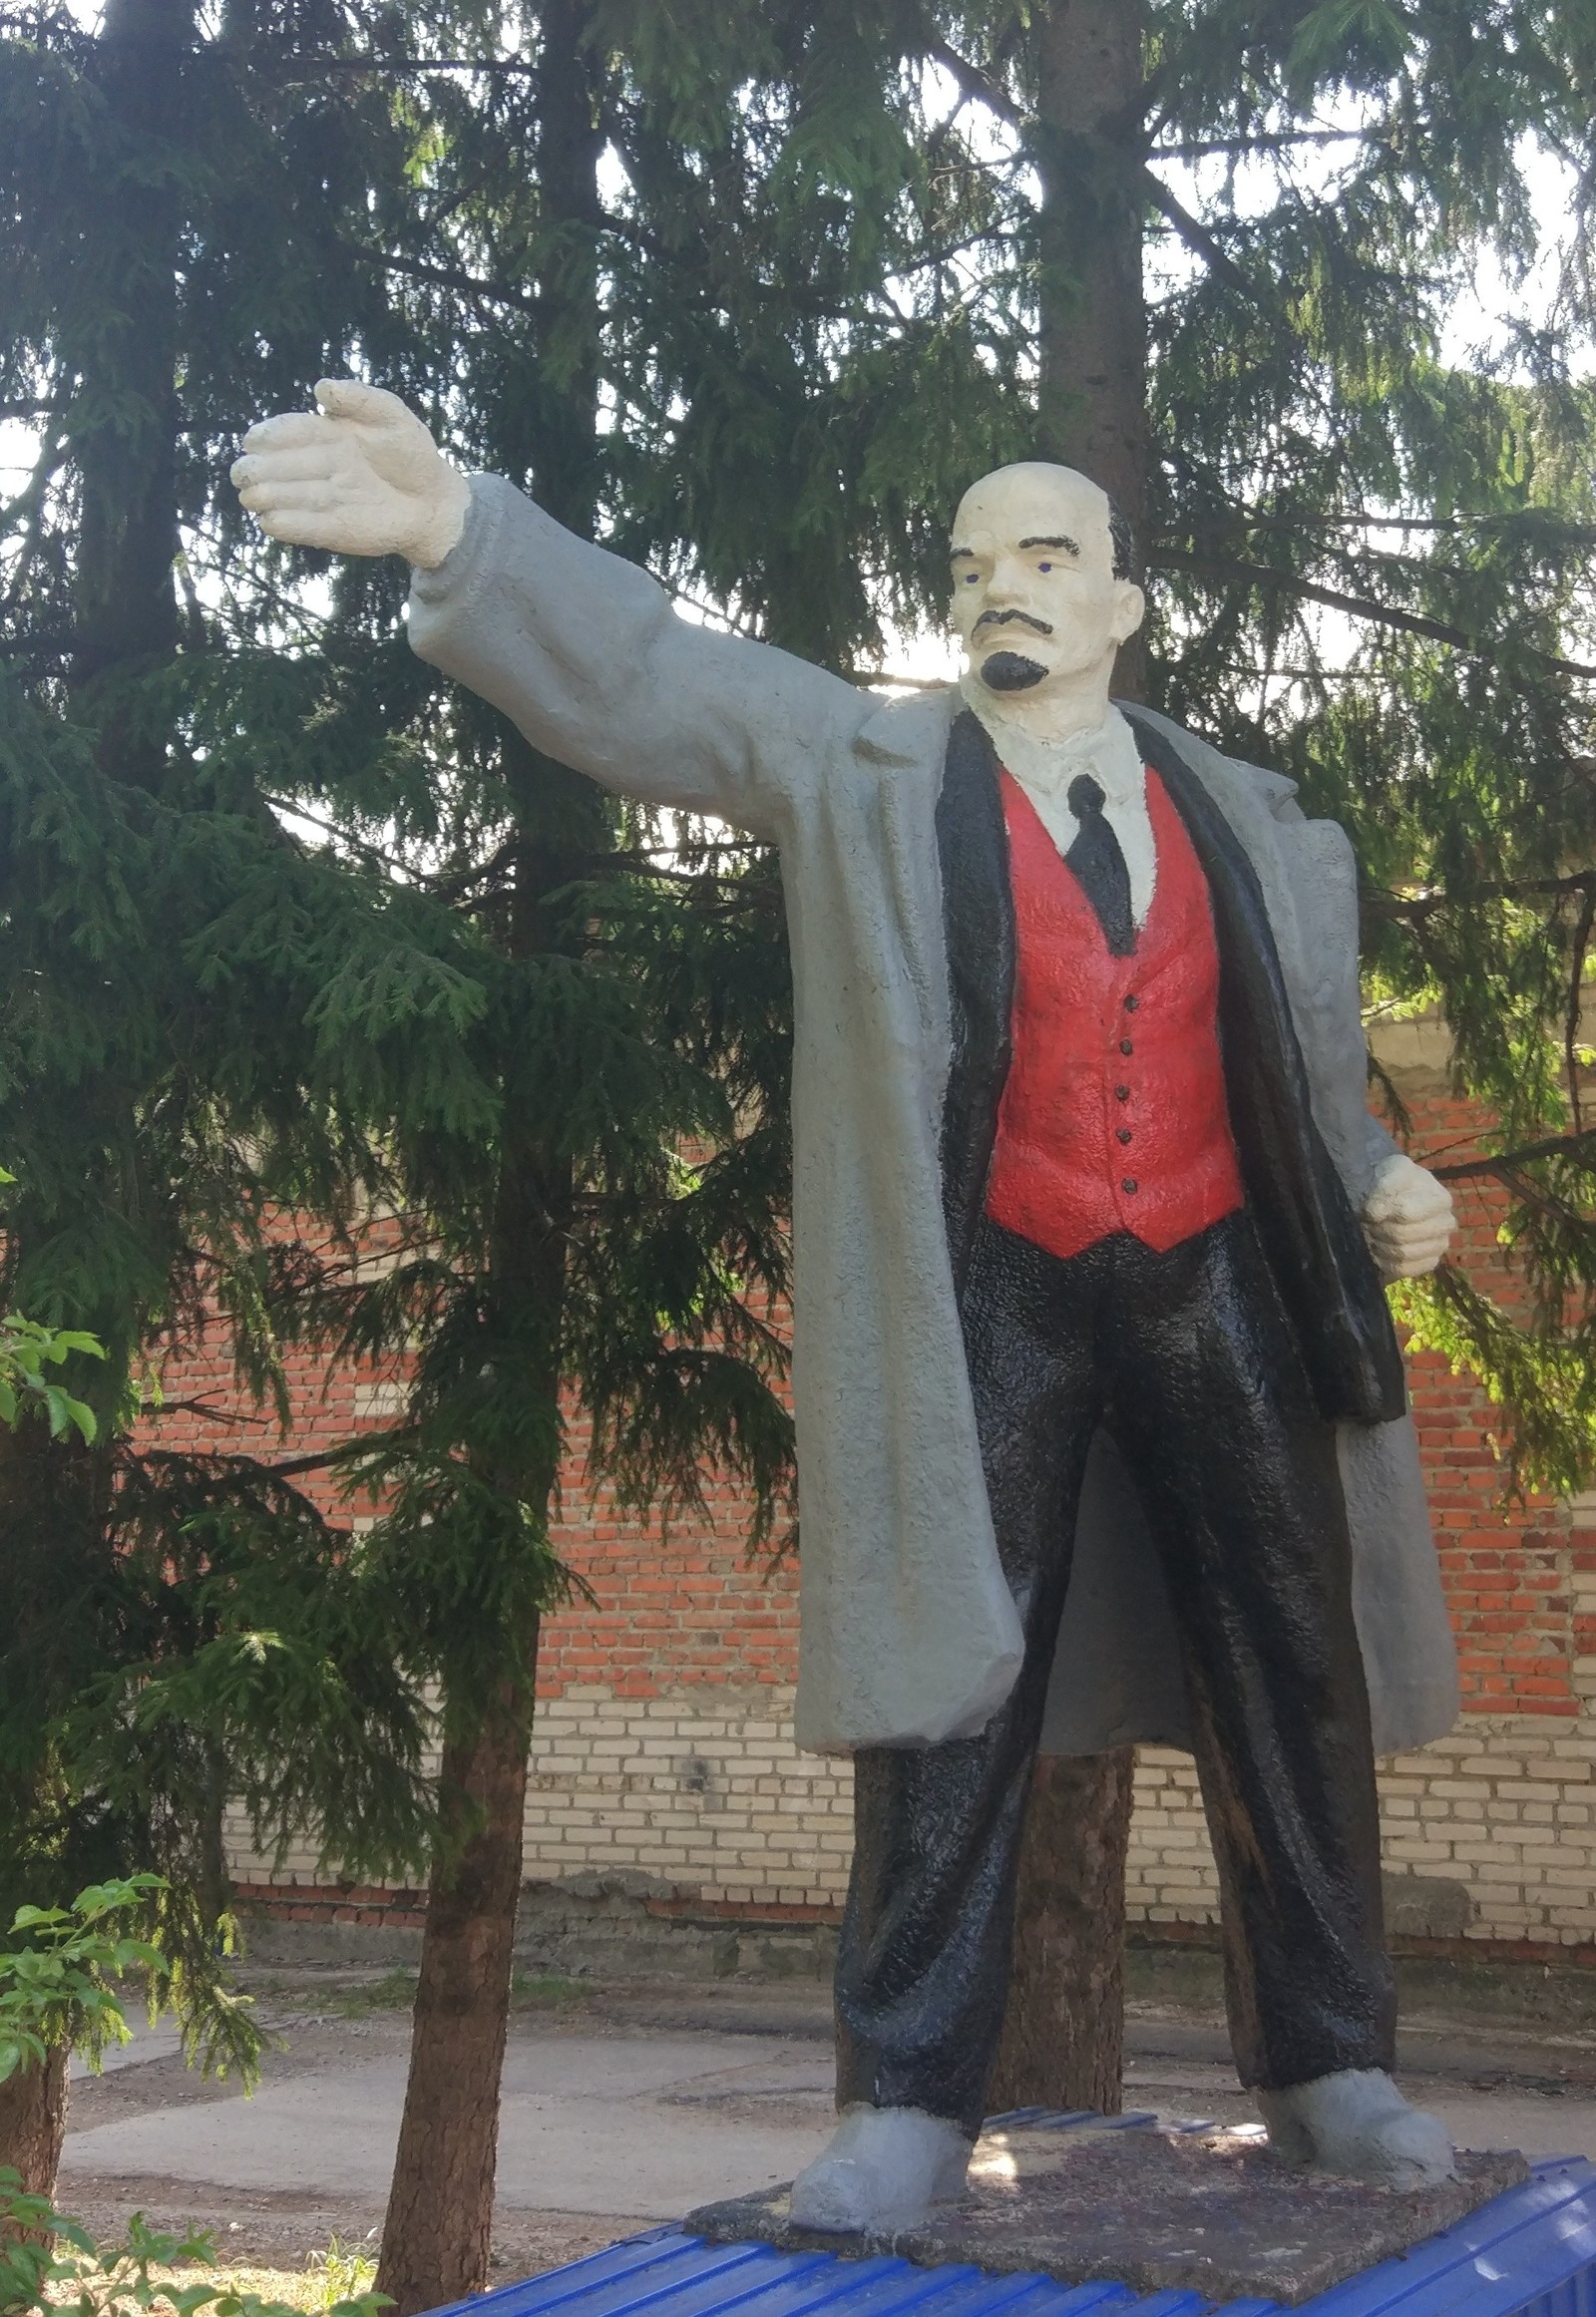 Go, comrades, hipster! - The photo, Lenin, Monument, Hipster